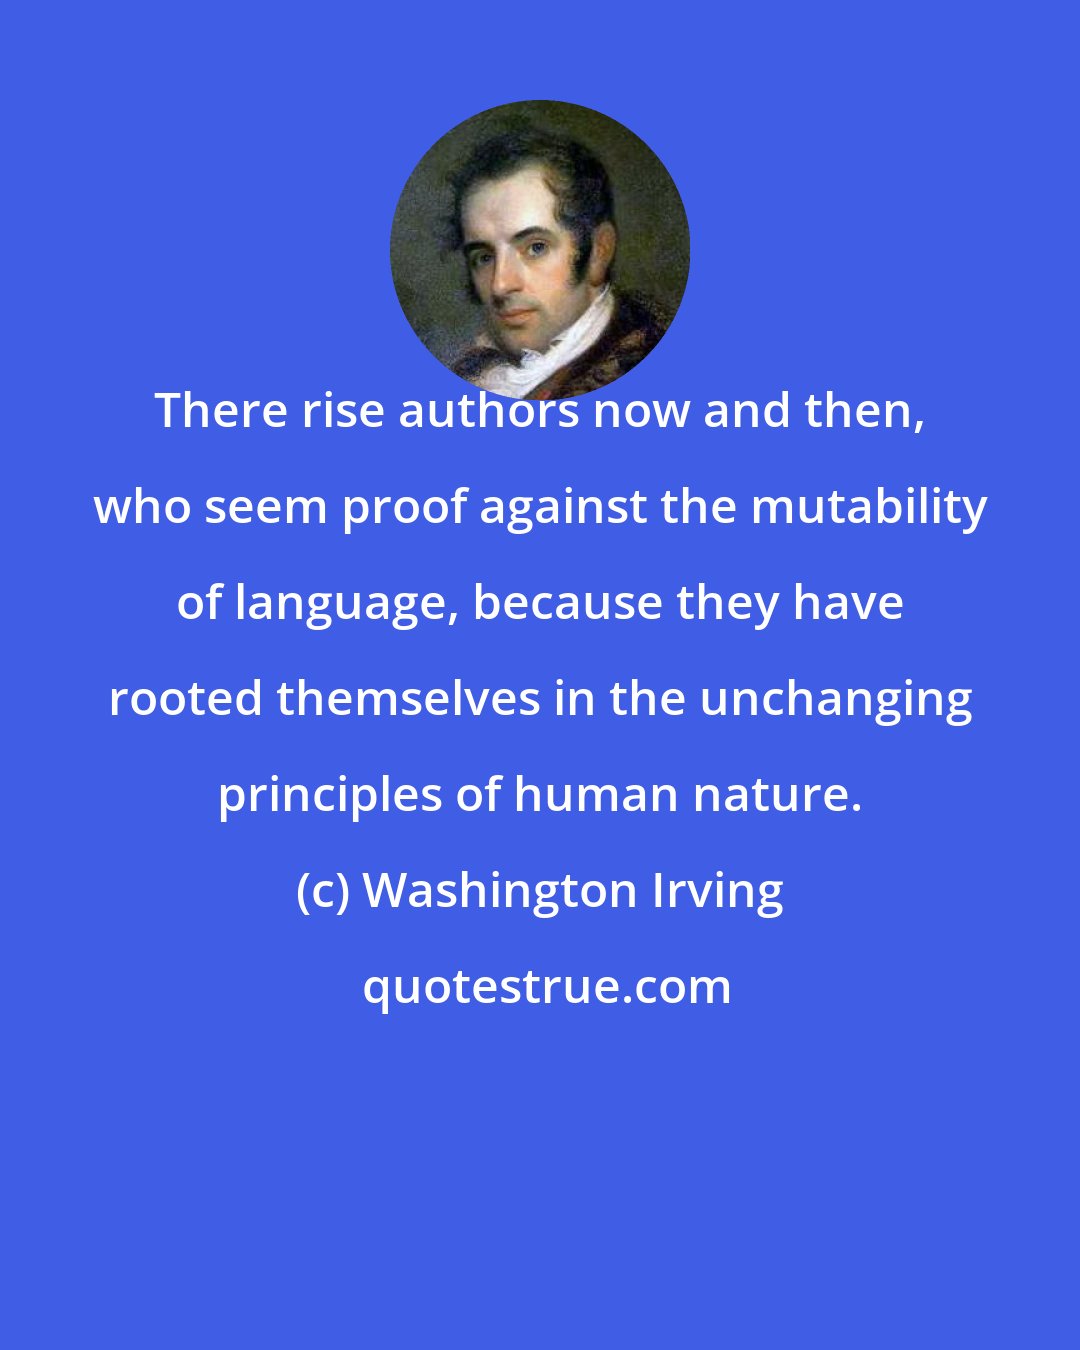 Washington Irving: There rise authors now and then, who seem proof against the mutability of language, because they have rooted themselves in the unchanging principles of human nature.